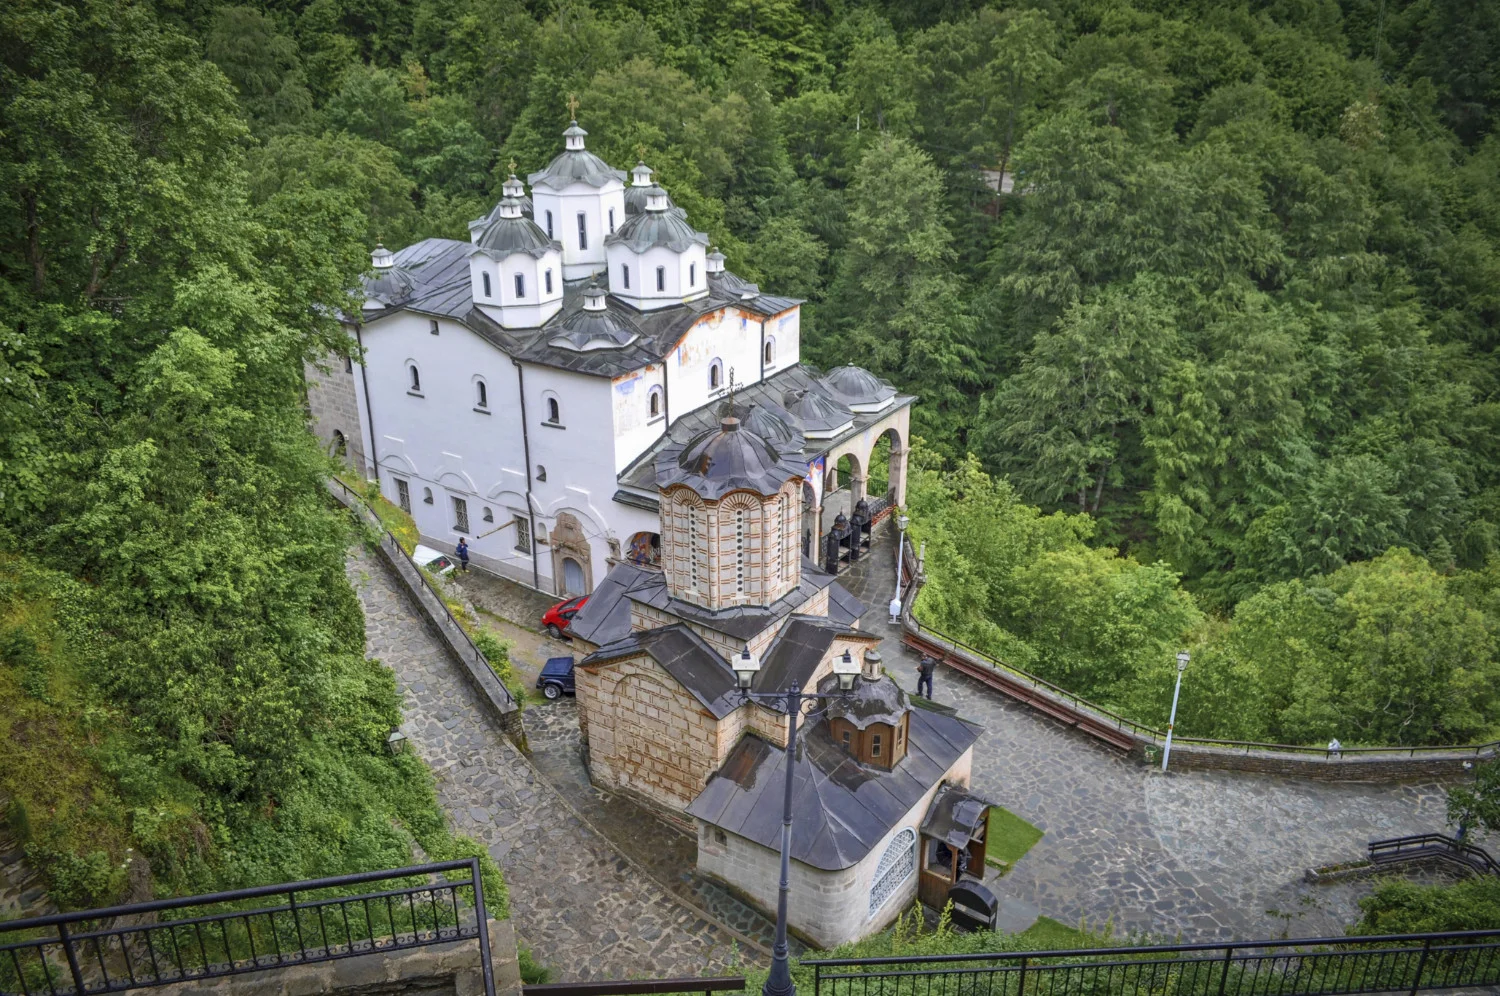 Follow the road and look out for the St. Joachim Osogovski Orthodox Monastery.